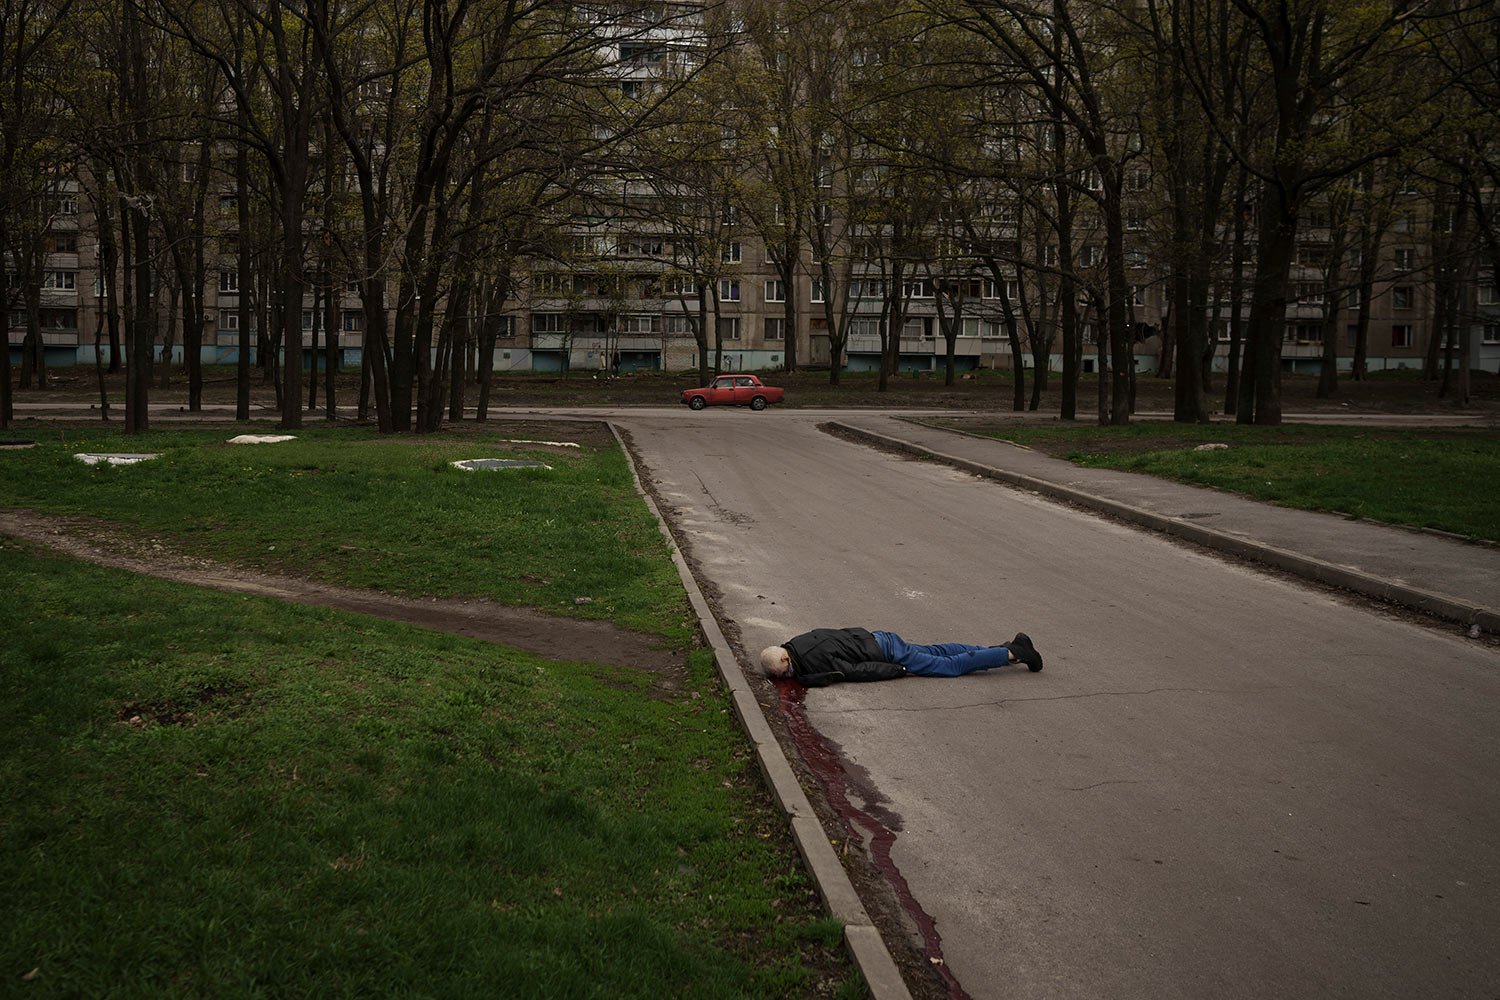  The body of a man killed during a Russian bombardment lies on a street at a residential neighborhood in Kharkiv, Ukraine, Tuesday, April 19, 2022. (AP Photo/Felipe Dana)  